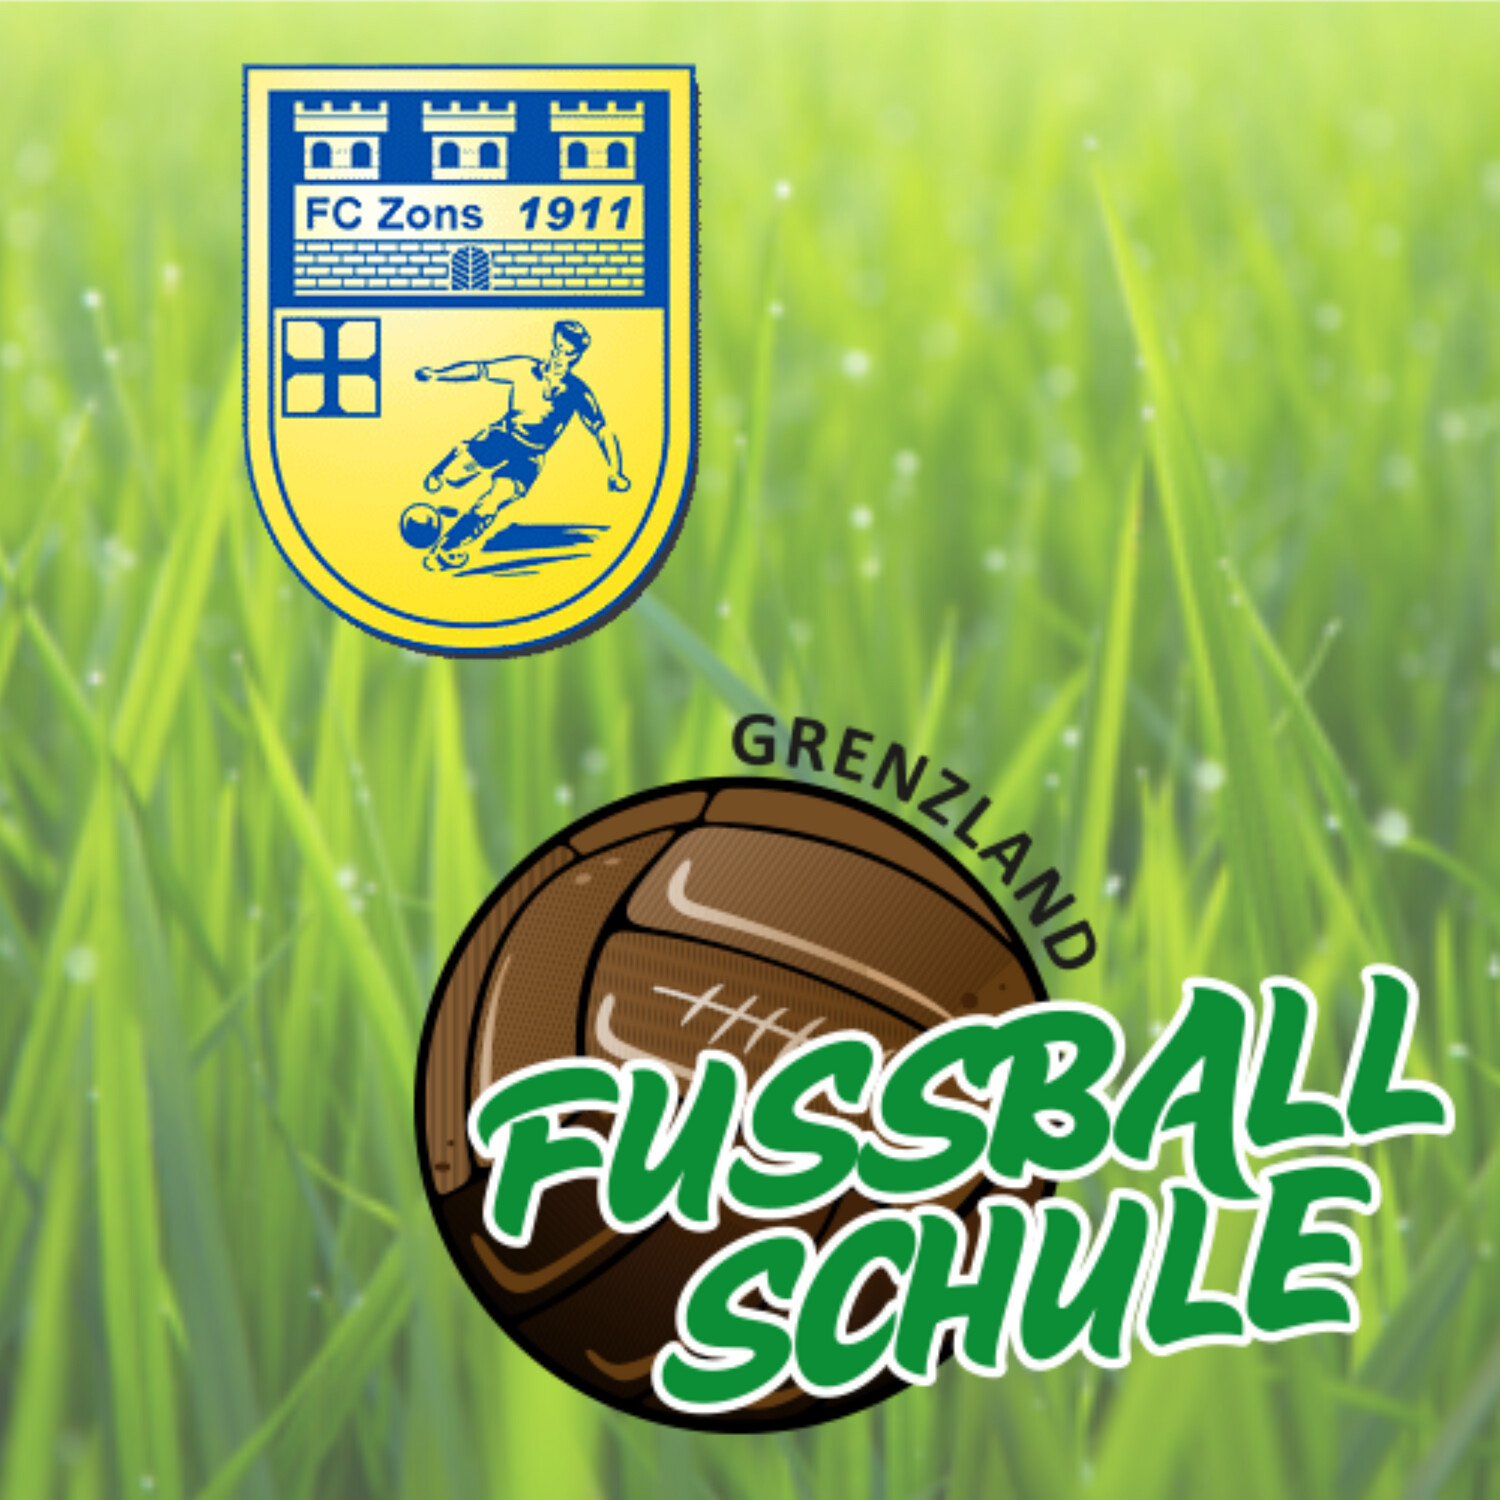 Herbst-Camp
FC Zons
(21.10. - 25.10.2024)